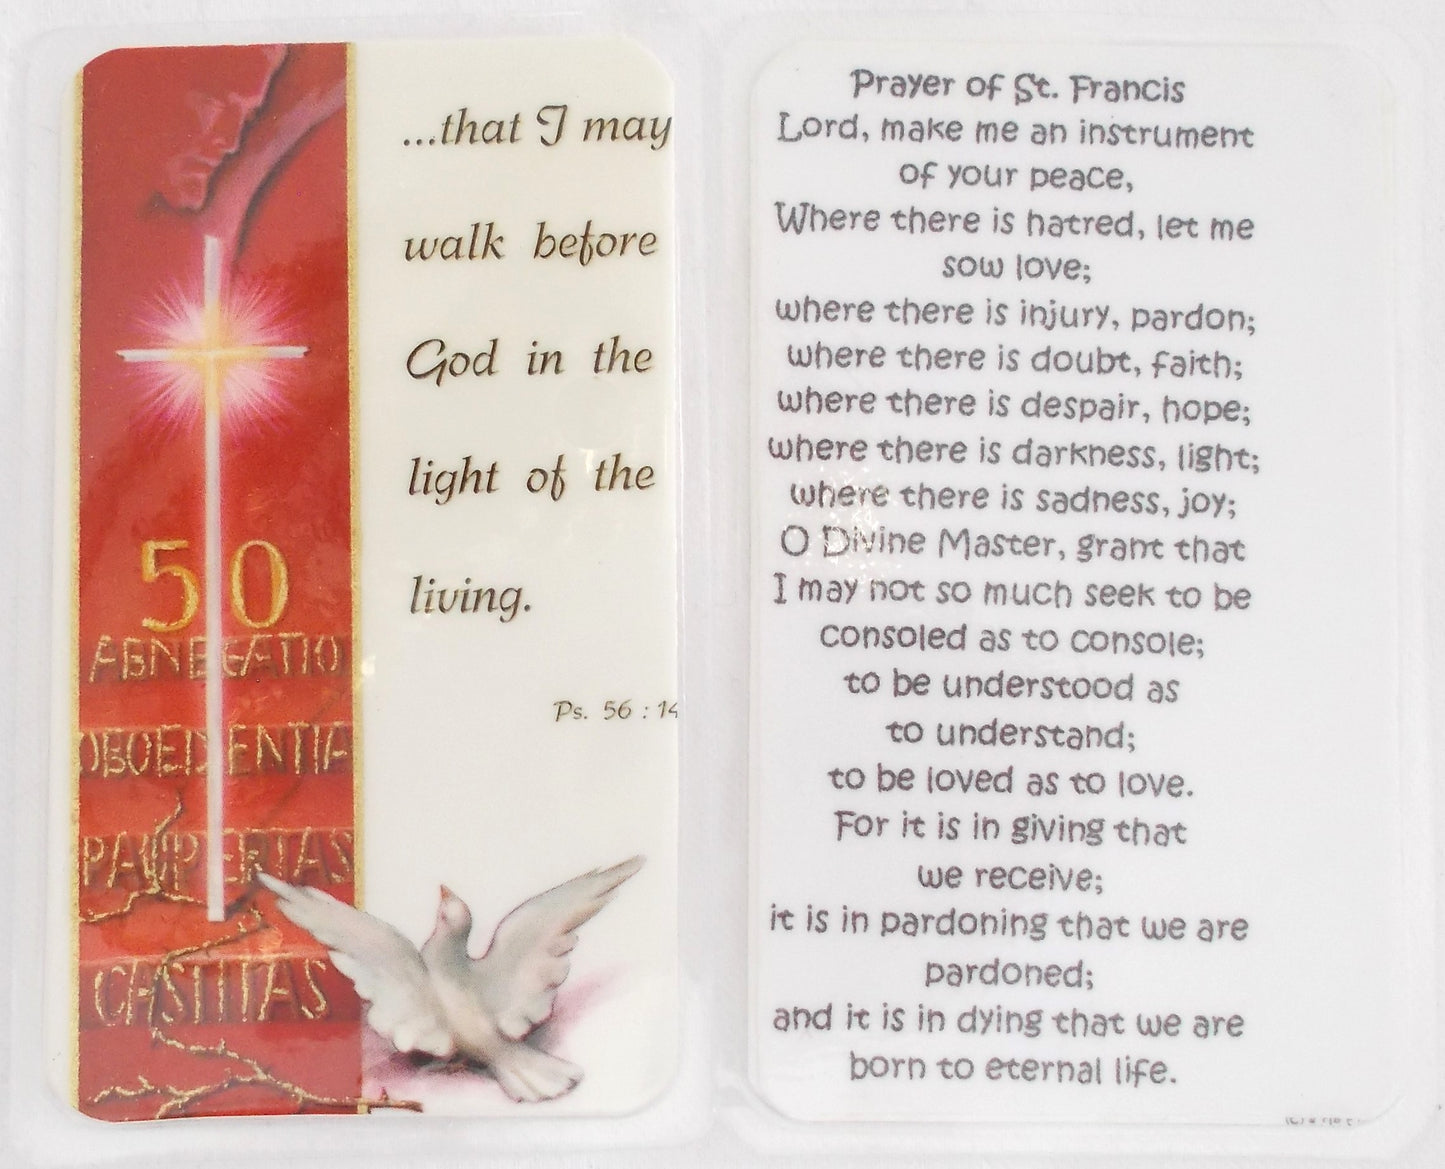 Laminated - 50th Jubilee - Prayer of St. Francis